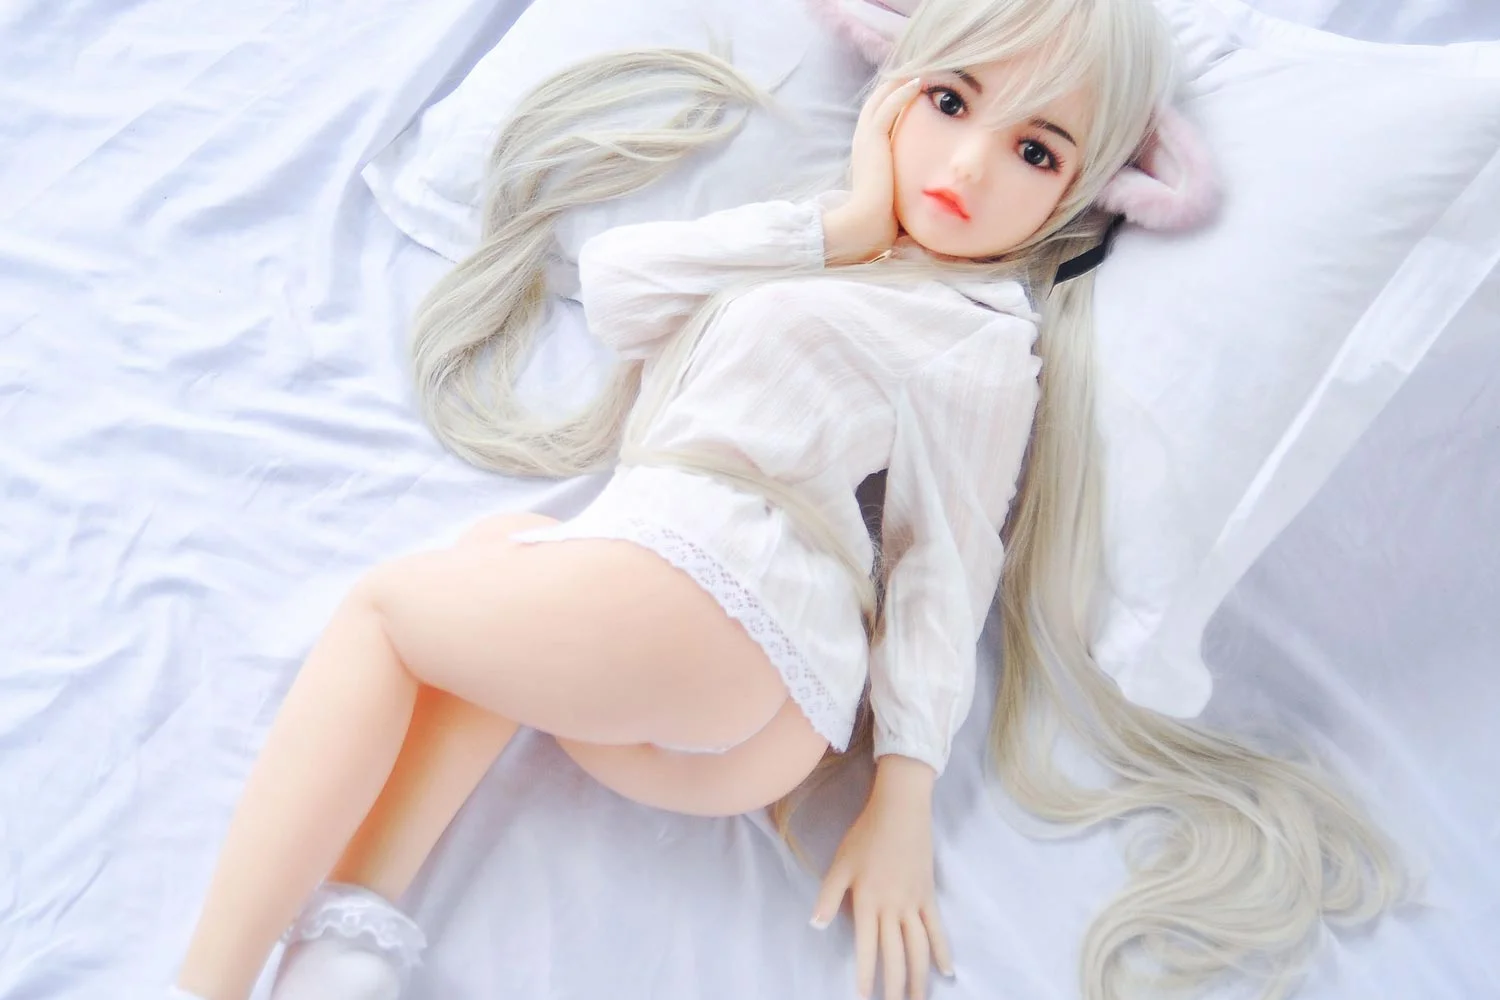 Mini sex doll with hands on the bed